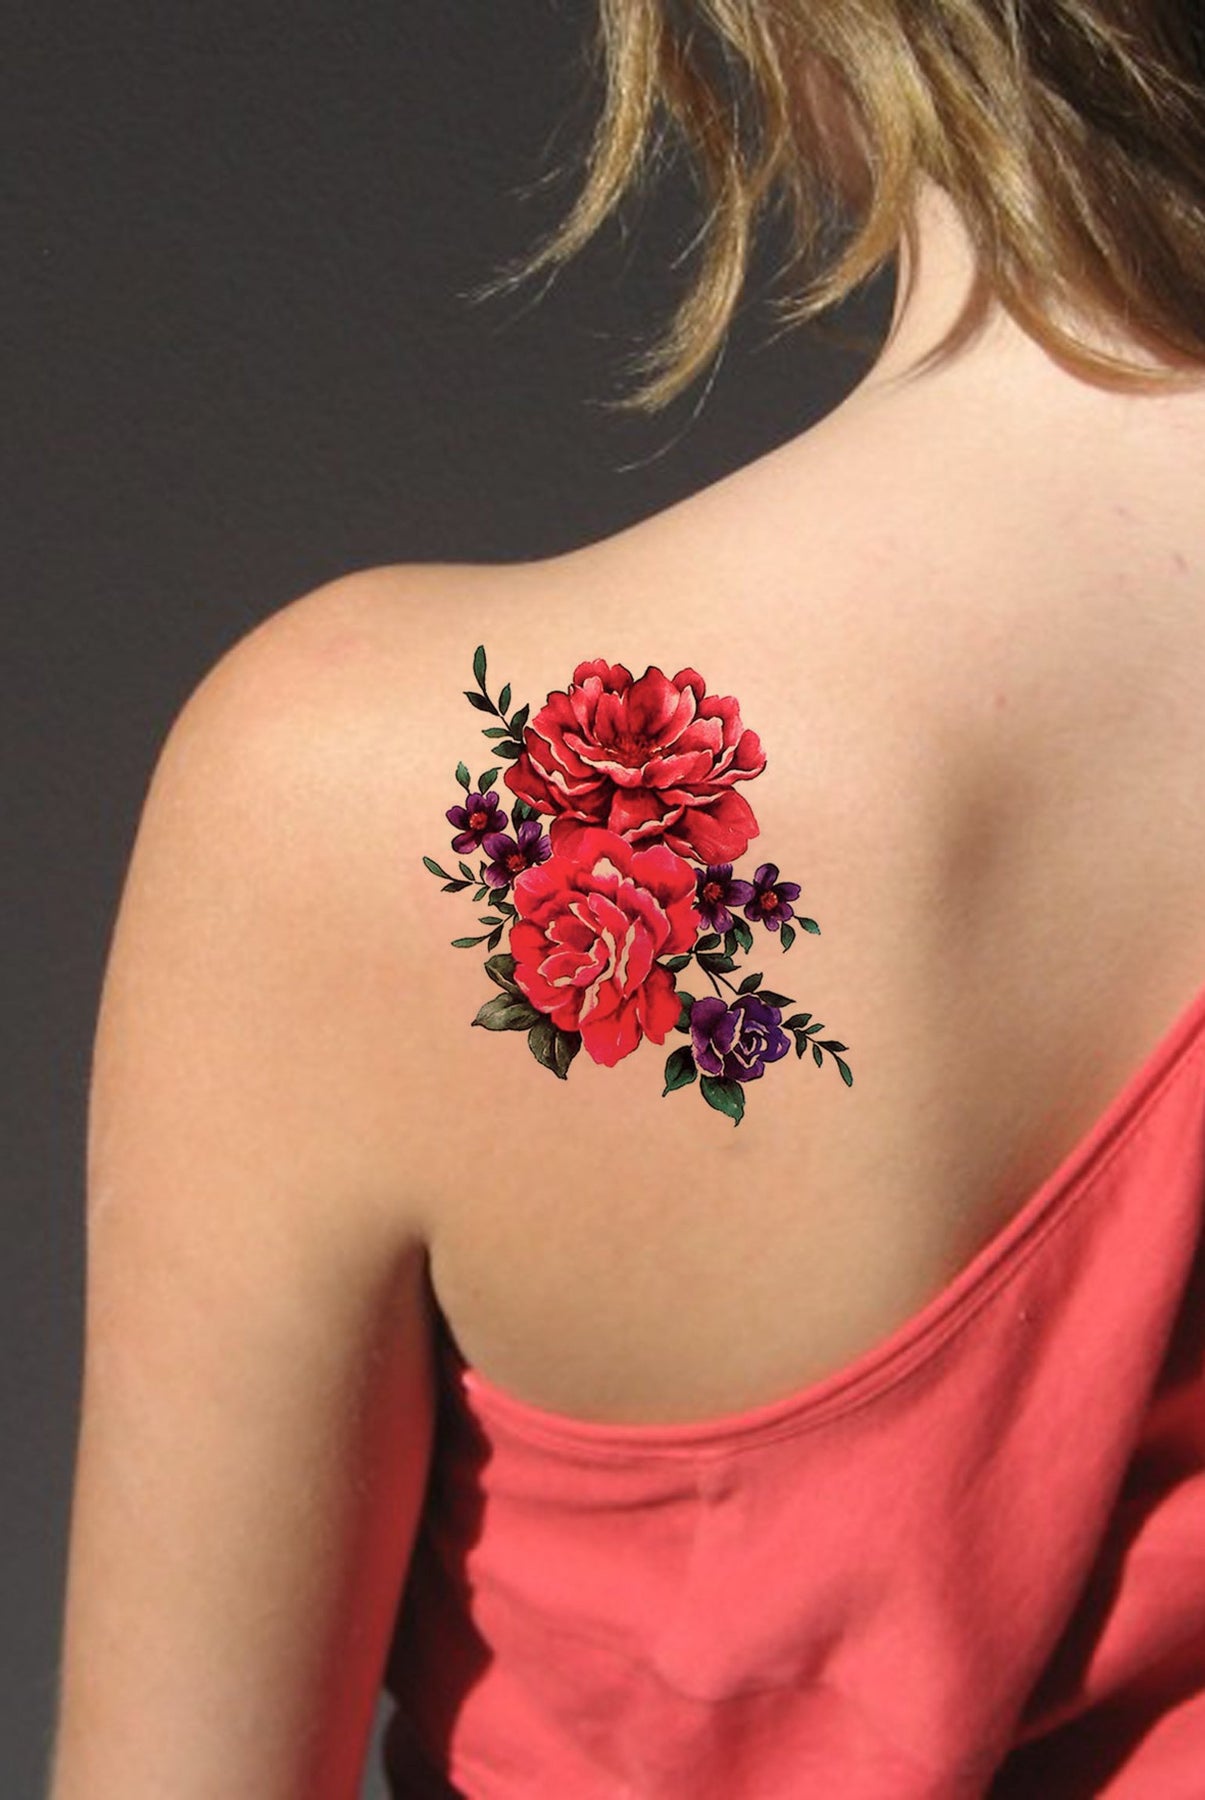 61 Stunning Back Tattoos For Women with Meaning  Our Mindful Life